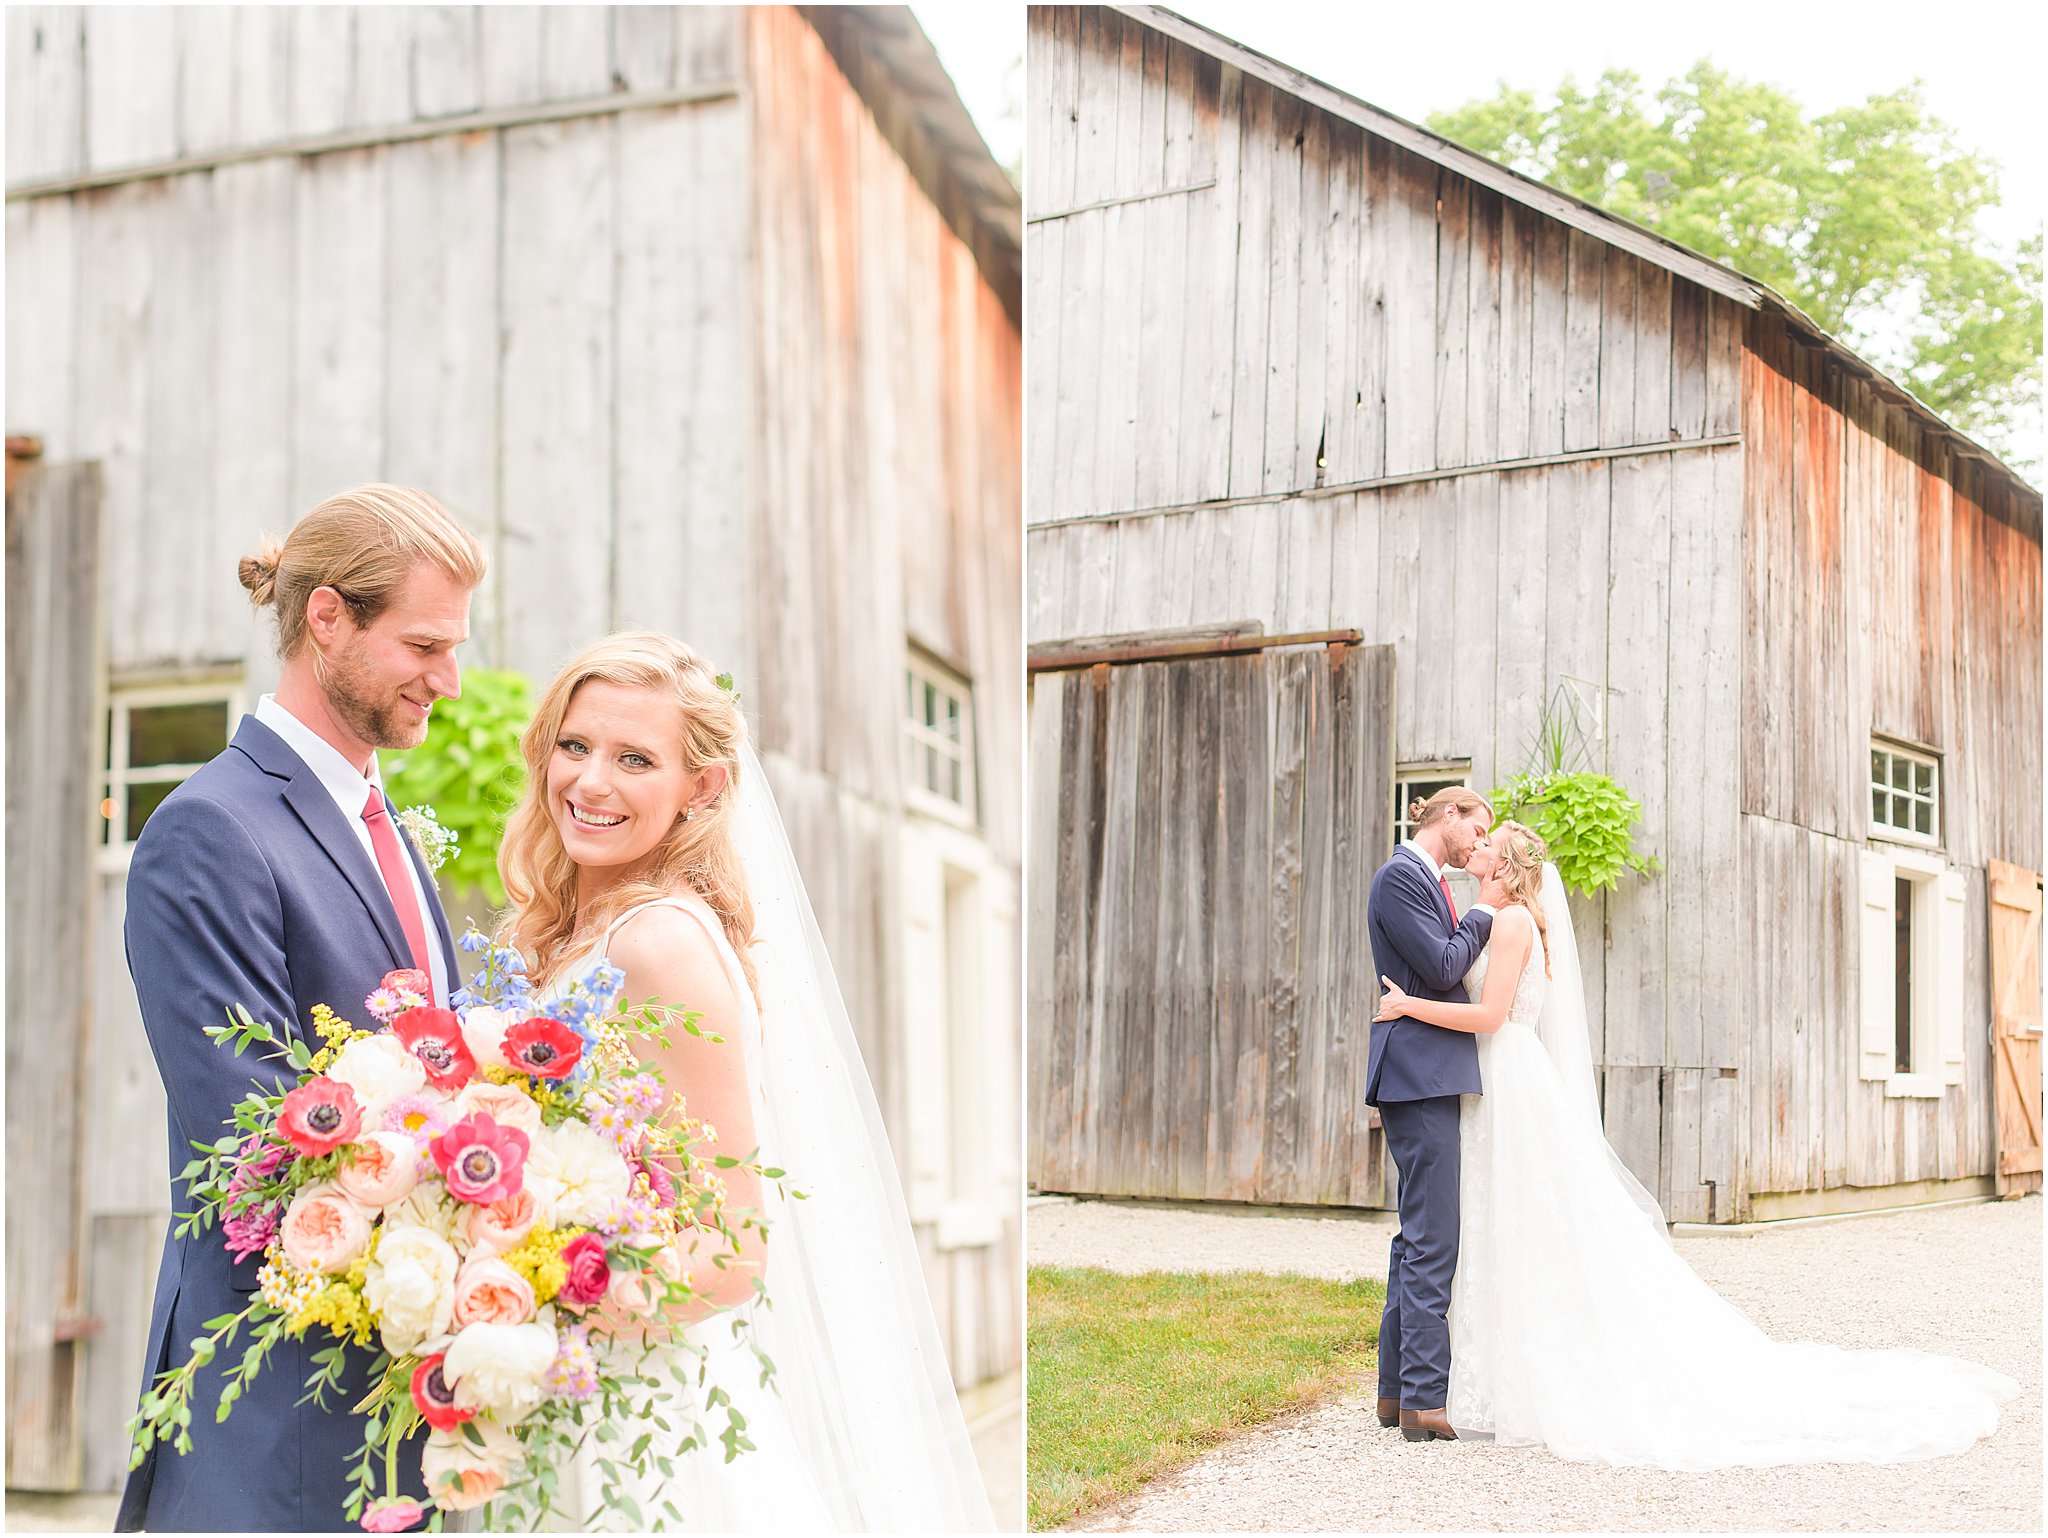 Bride and groom laughing together The Old Barn At Brown County wedding